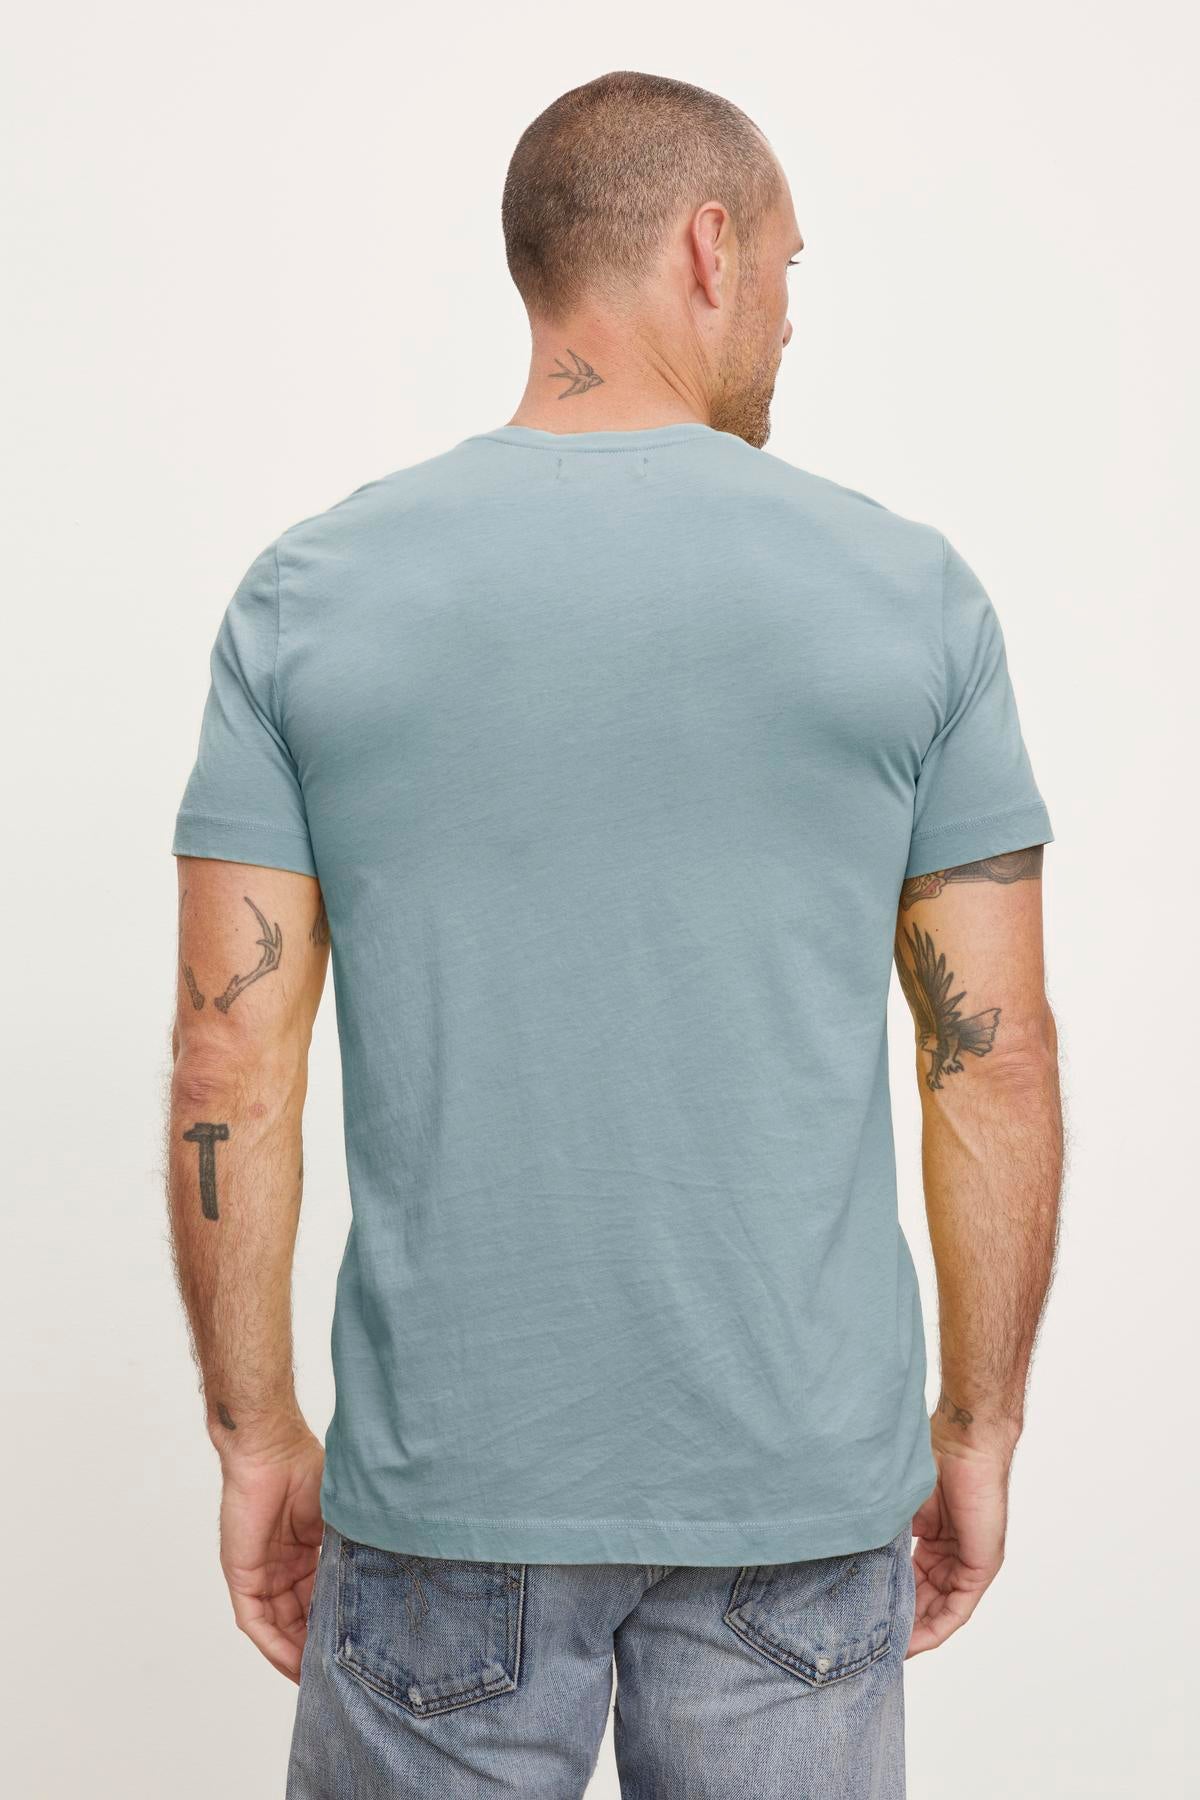 The back view of a man wearing a Velvet by Graham & Spencer HOWARD WHISPER CLASSIC CREW NECK TEE.-36009113780417